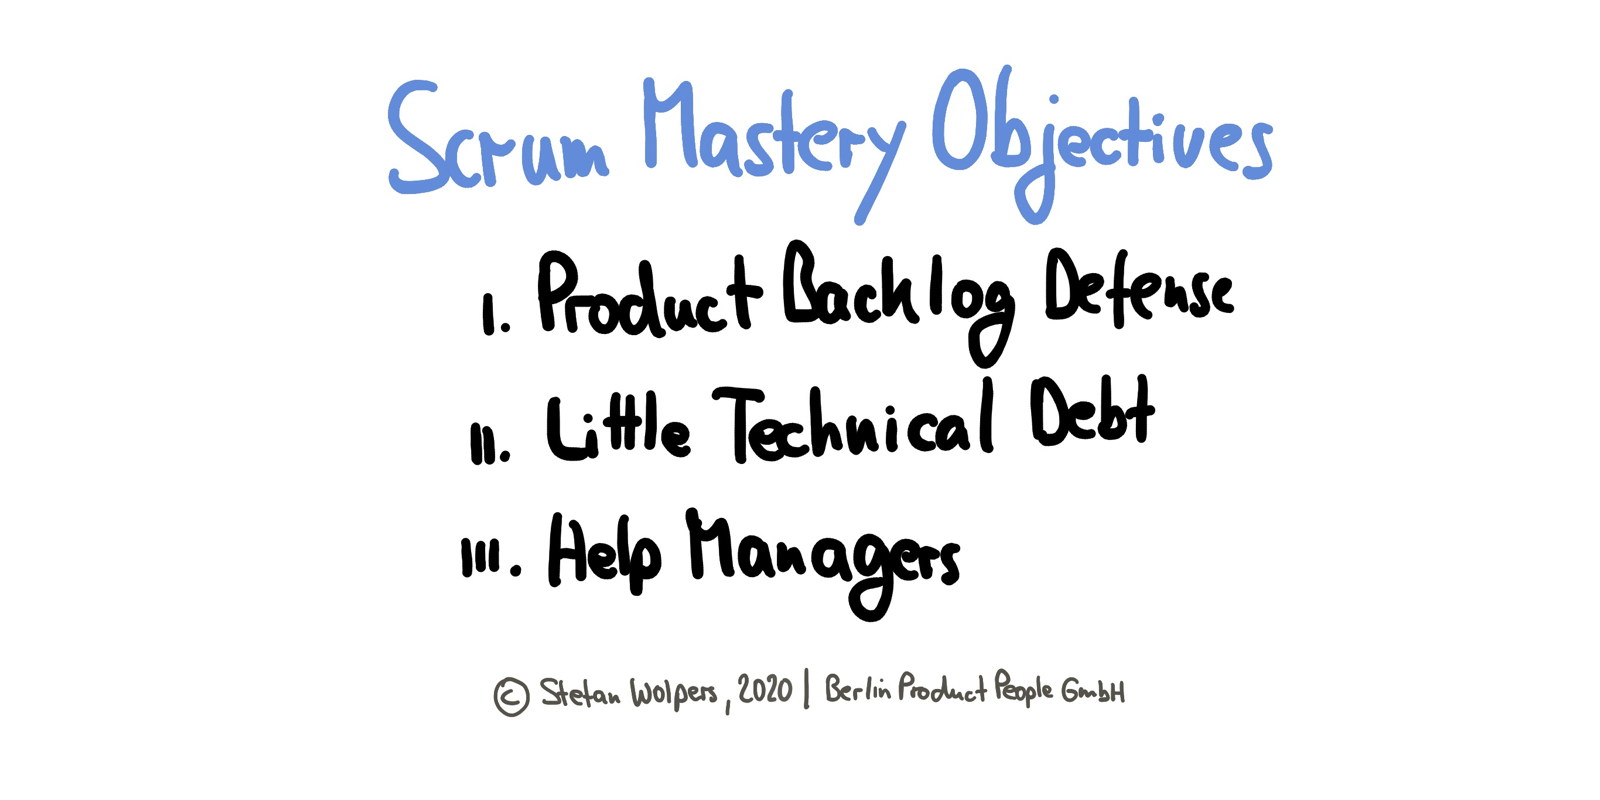 Scrum mastery objectives